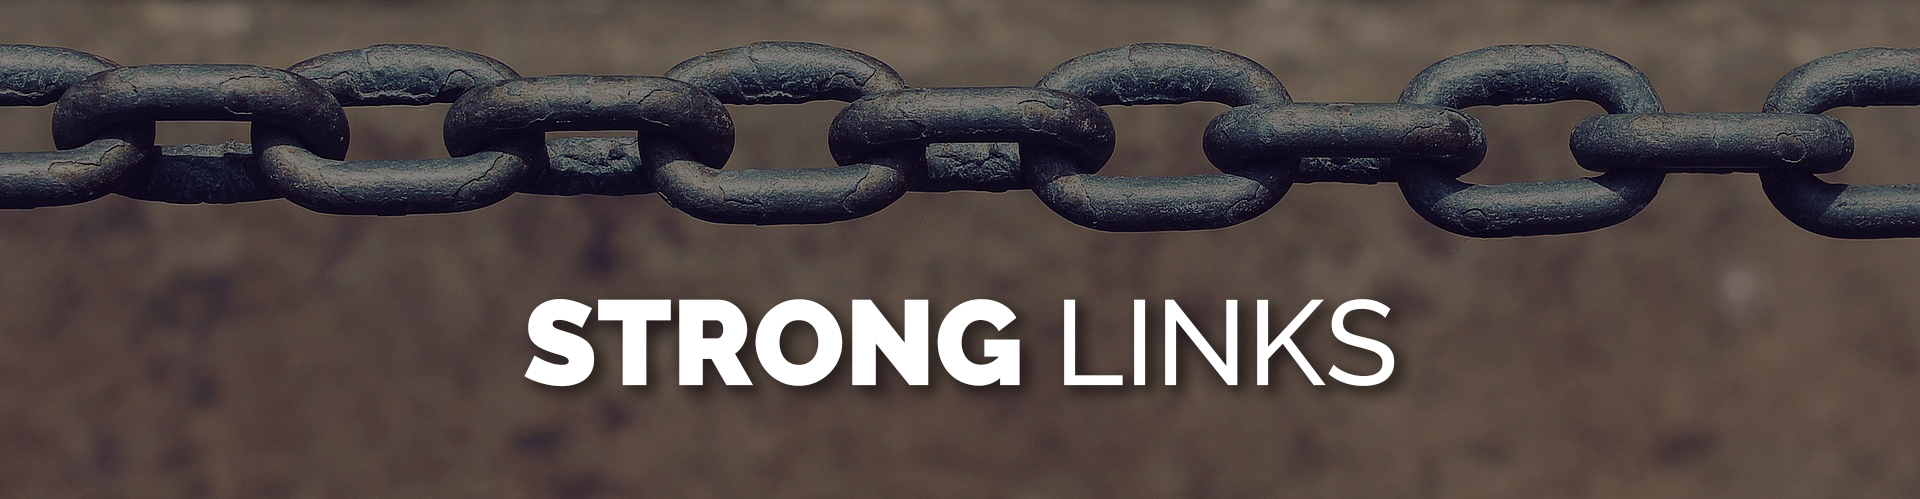 Strong Links Page Header